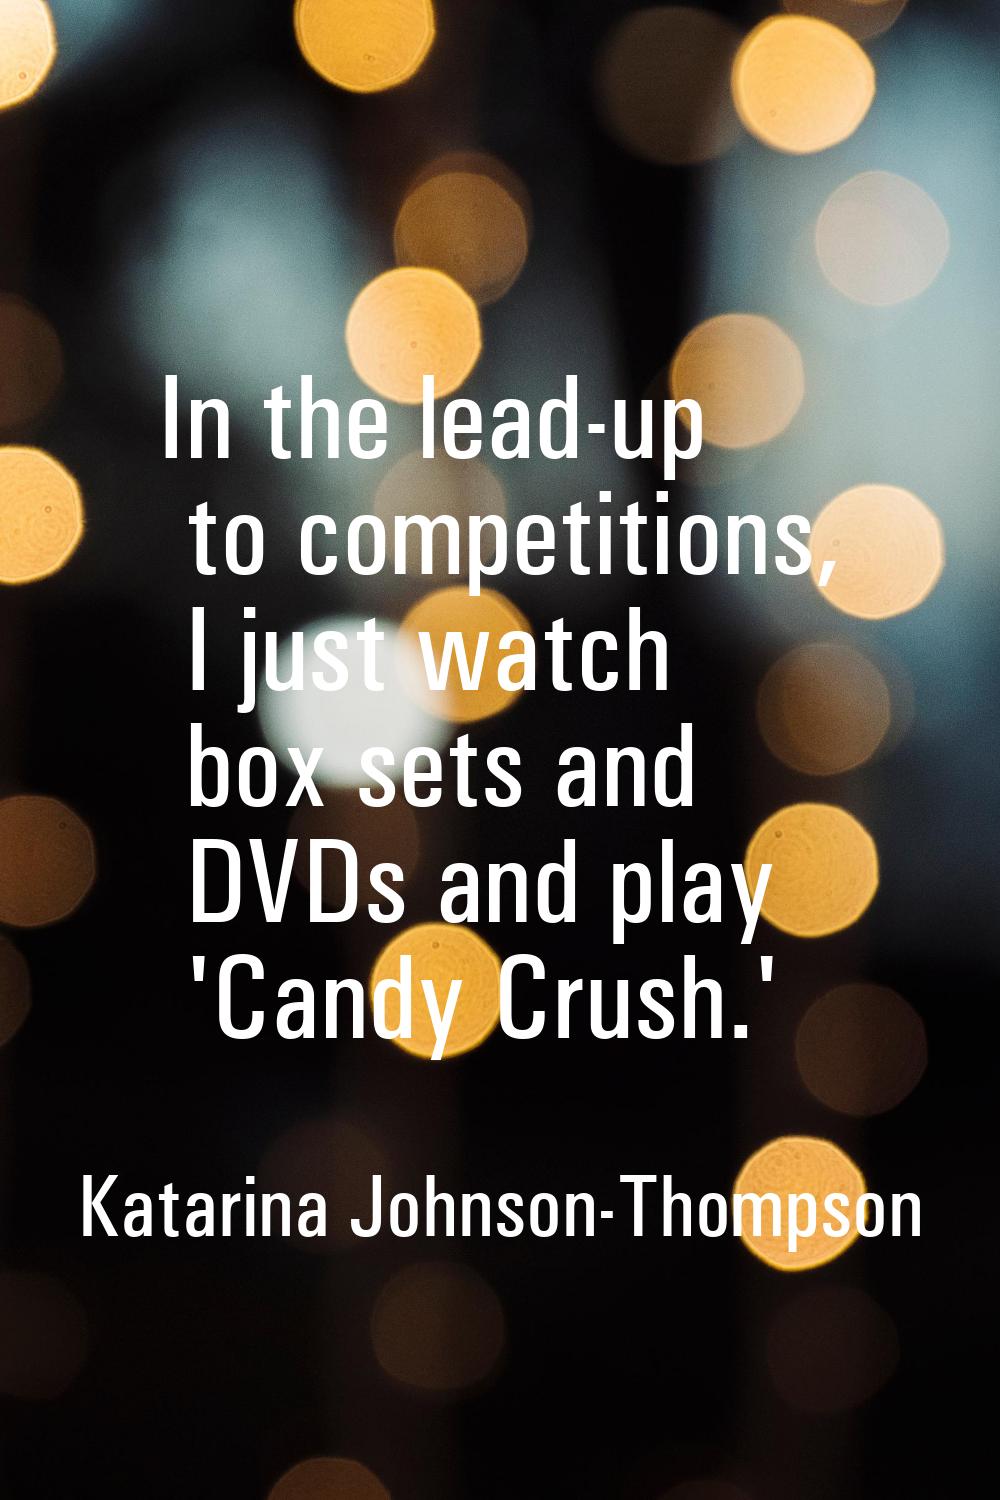 In the lead-up to competitions, I just watch box sets and DVDs and play 'Candy Crush.'